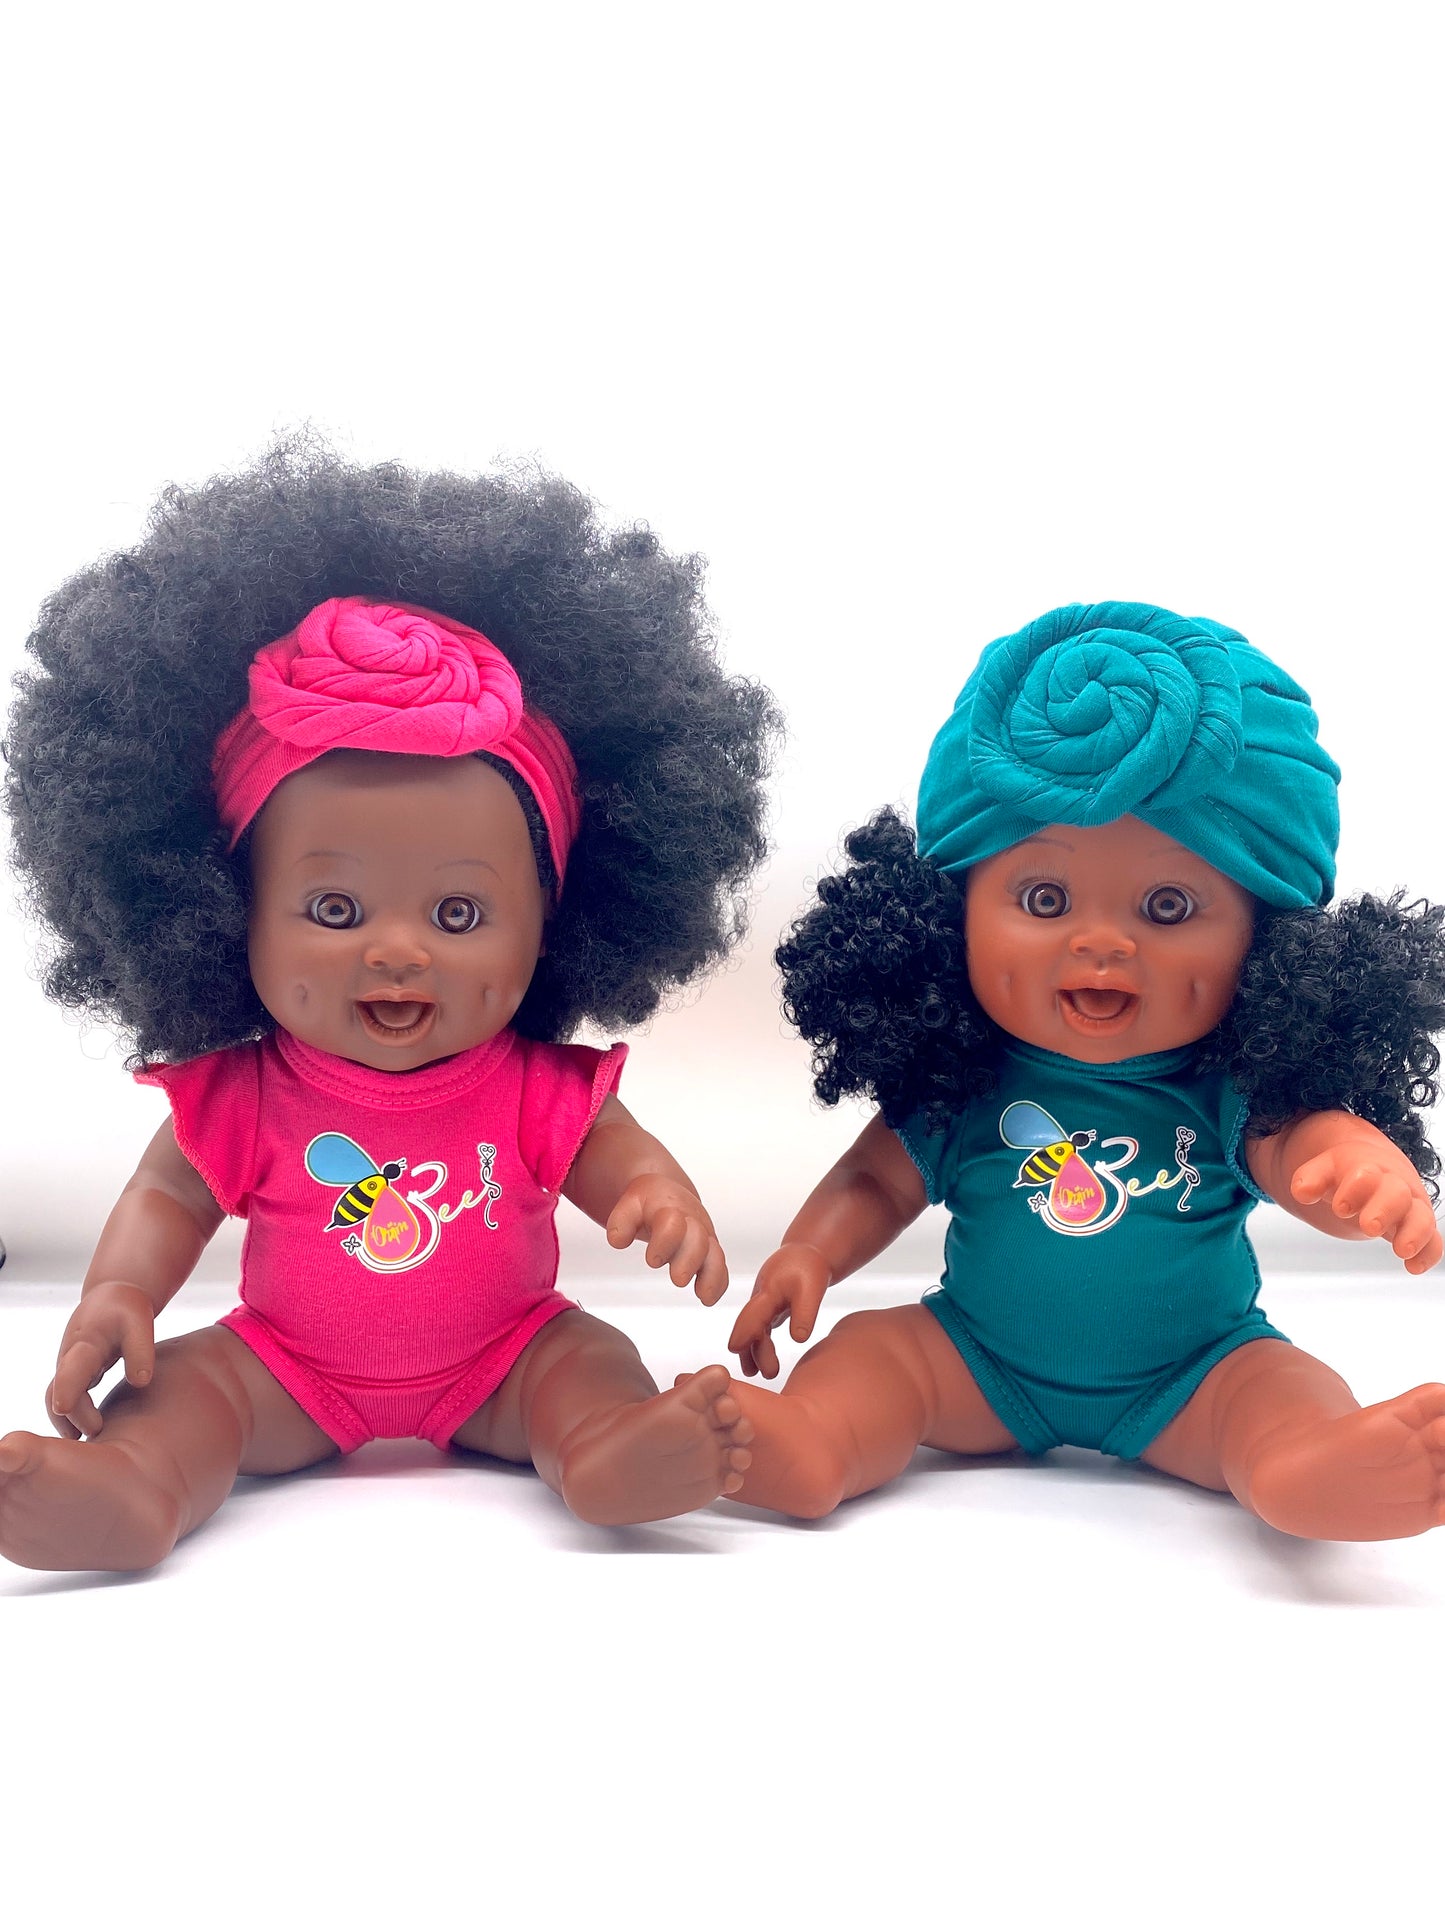 Romper & Turban Headband Set for Baby Bee Doll (doll sold separately)